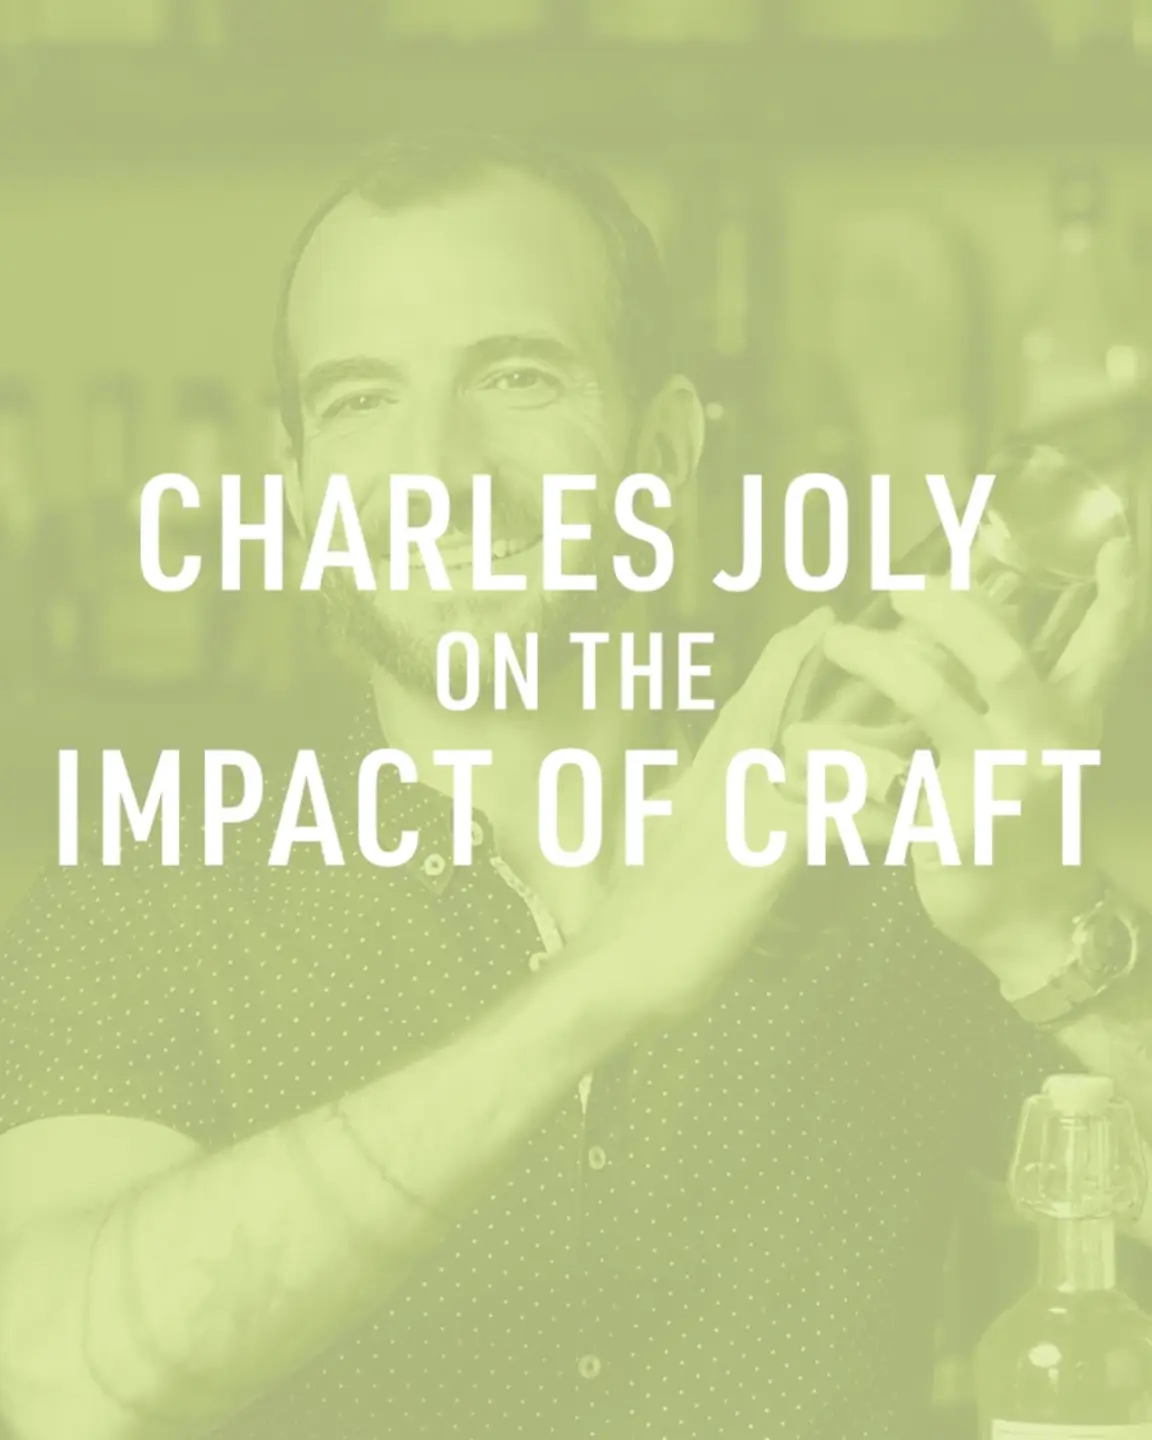 Charles jolly on the impact of craft in the online community.